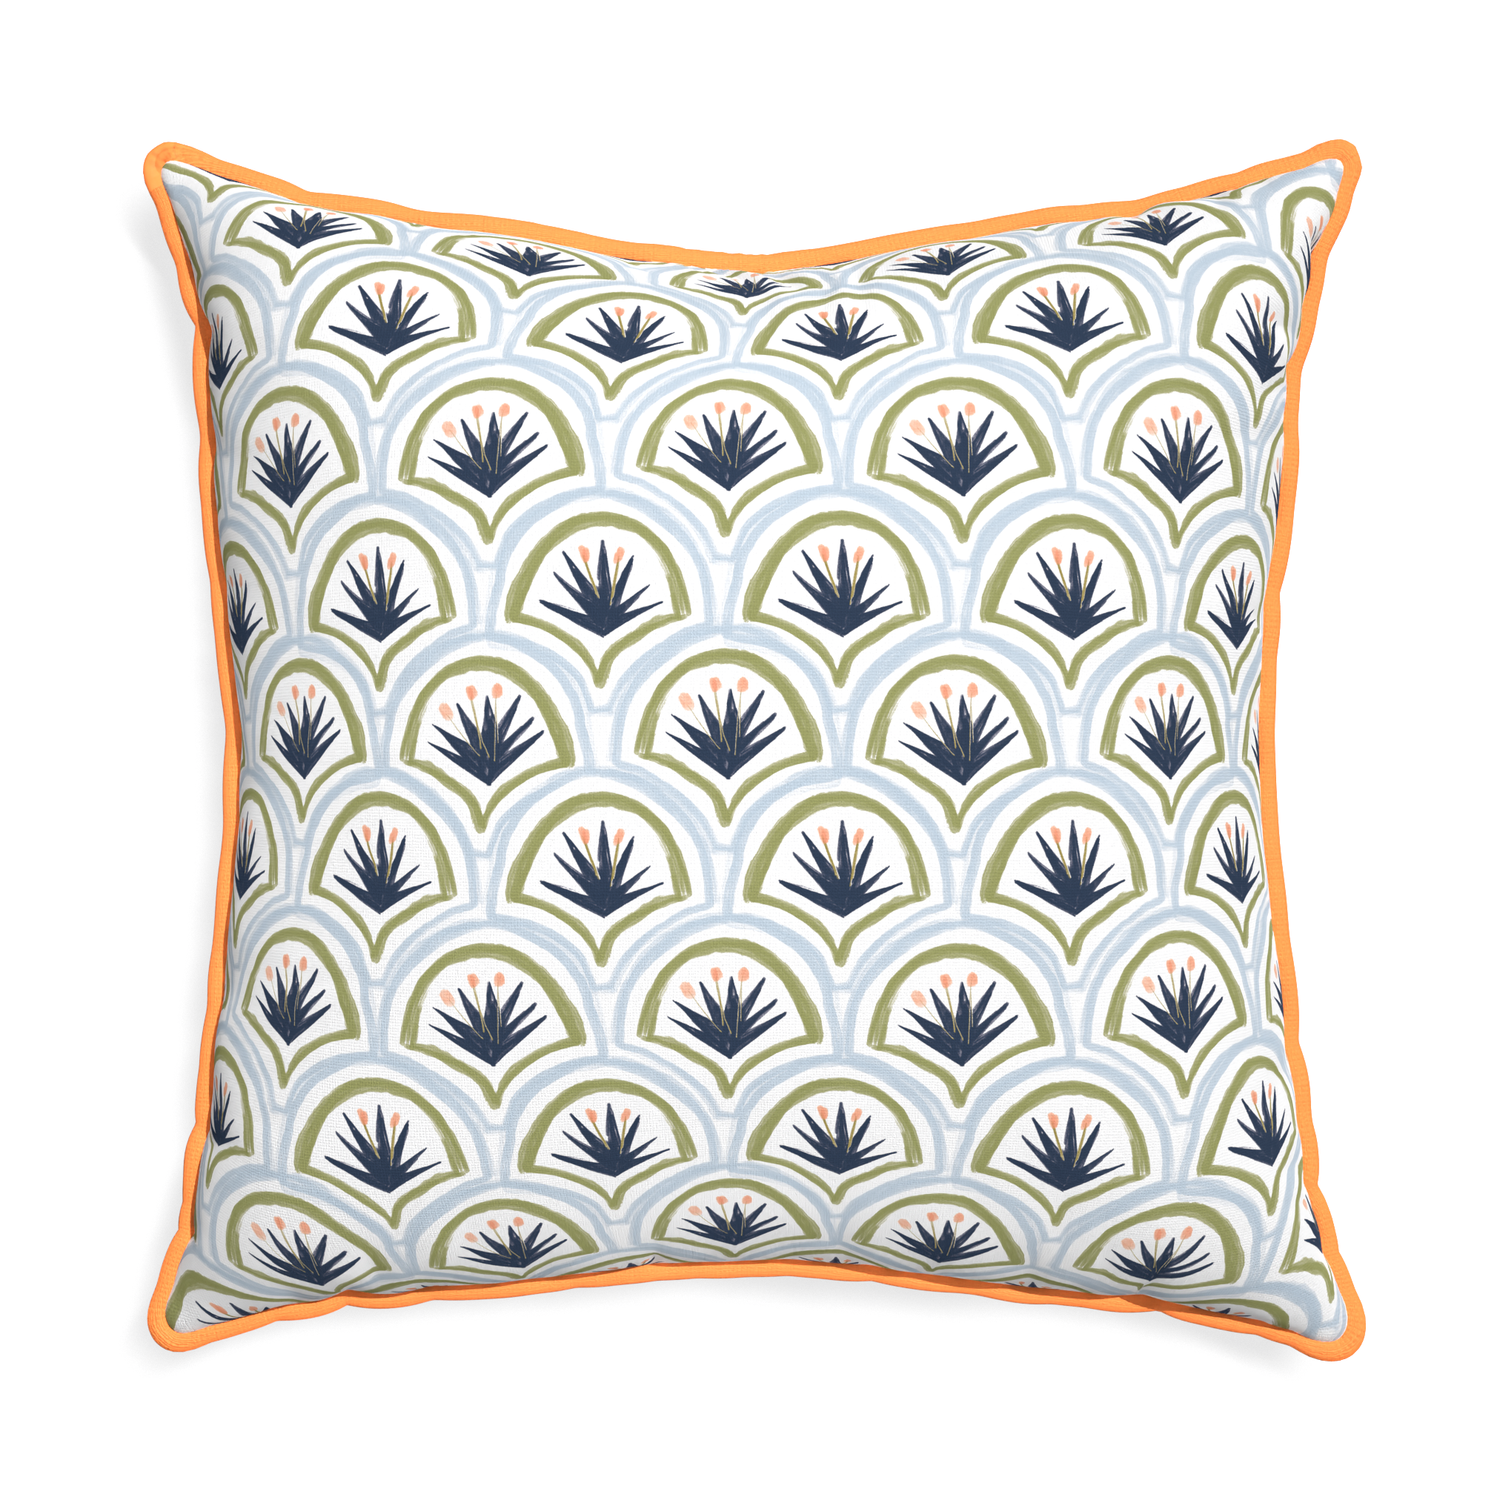 Euro-sham thatcher midnight custom art deco palm patternpillow with clementine piping on white background